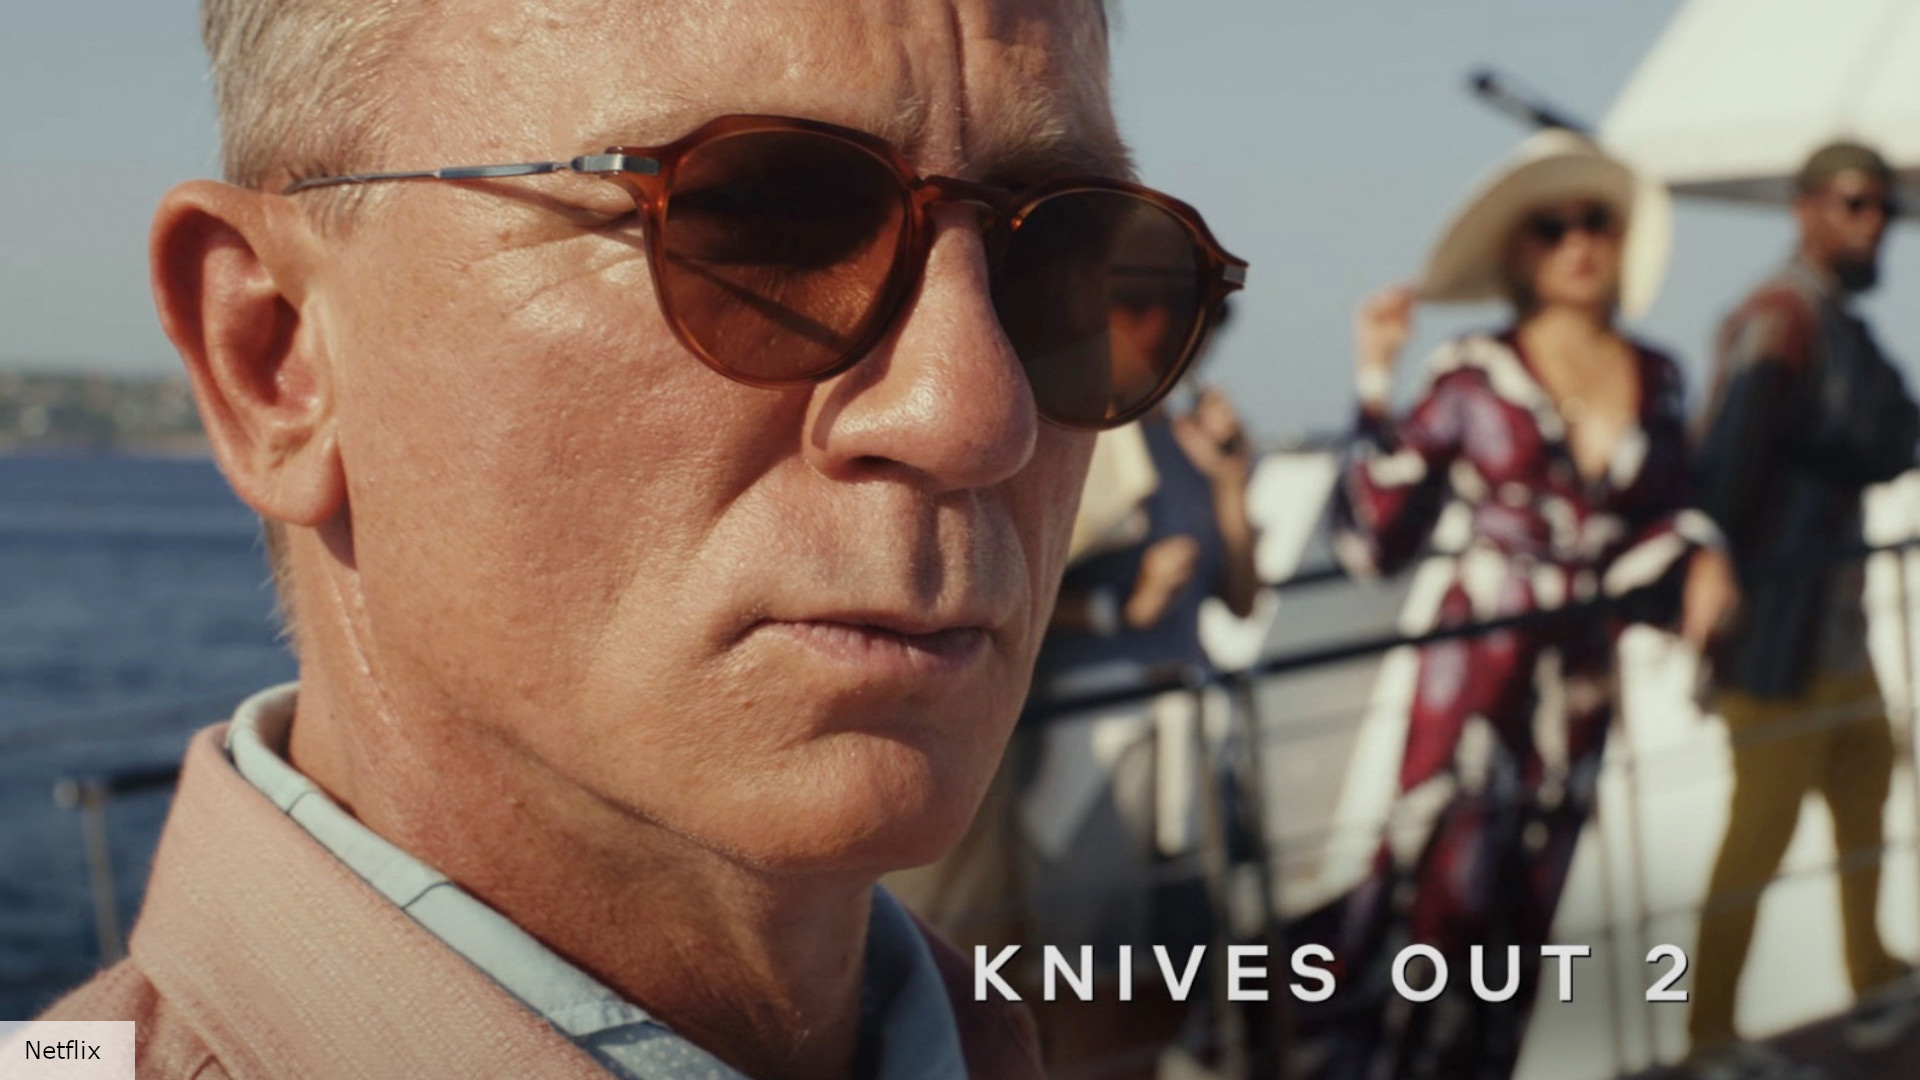 Knives Out 2: Daniel Craig's murder mystery movie, World premiere at the Toronto International Film Festival. 1920x1080 Full HD Background.